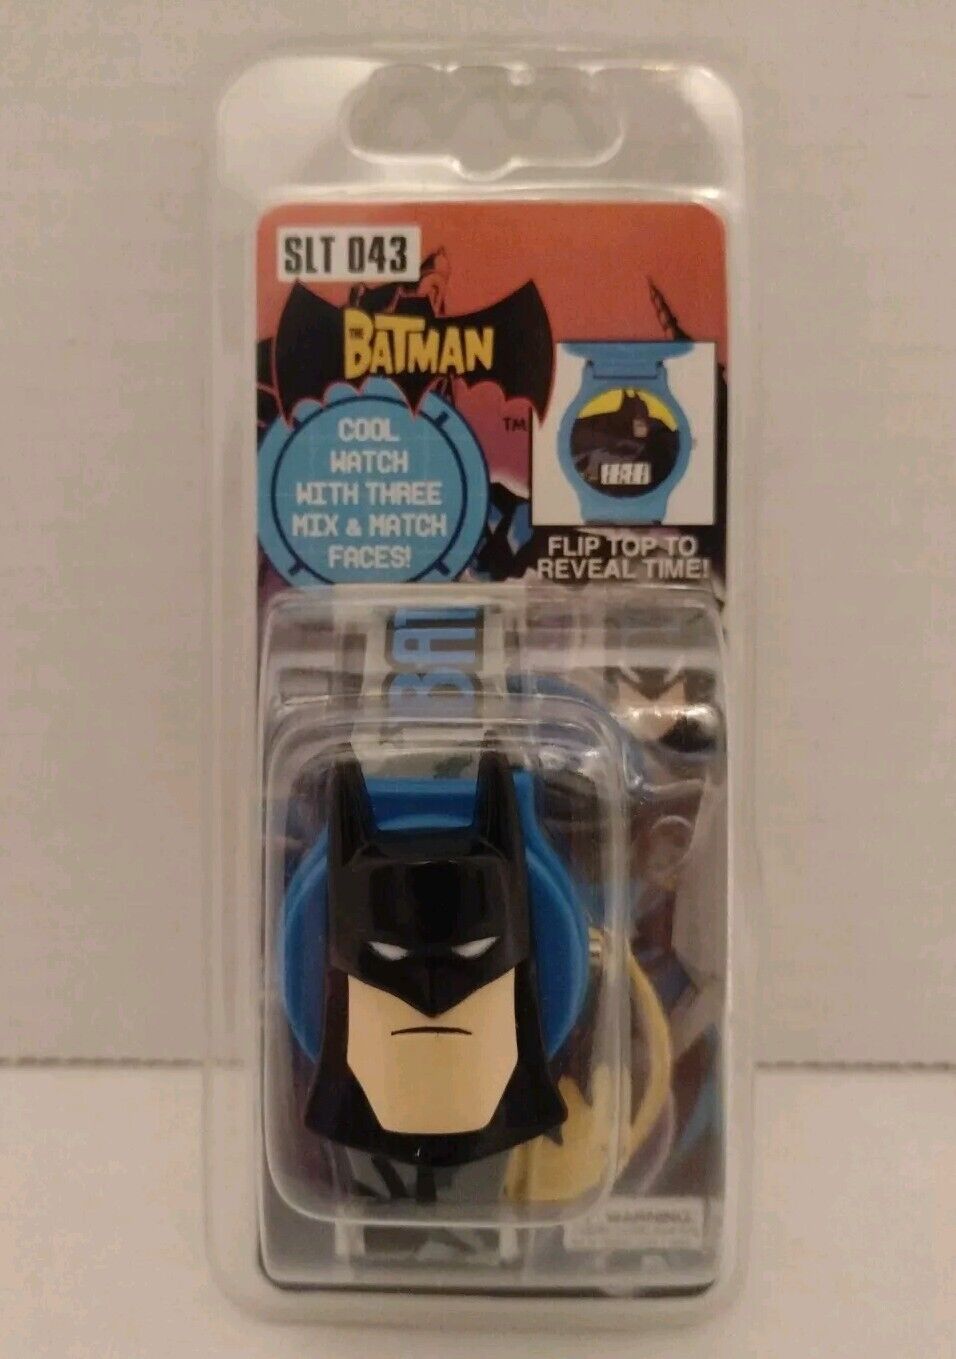 New Sealed The Batman Watch With 3 Mix Match Faces Flip Top Digital 